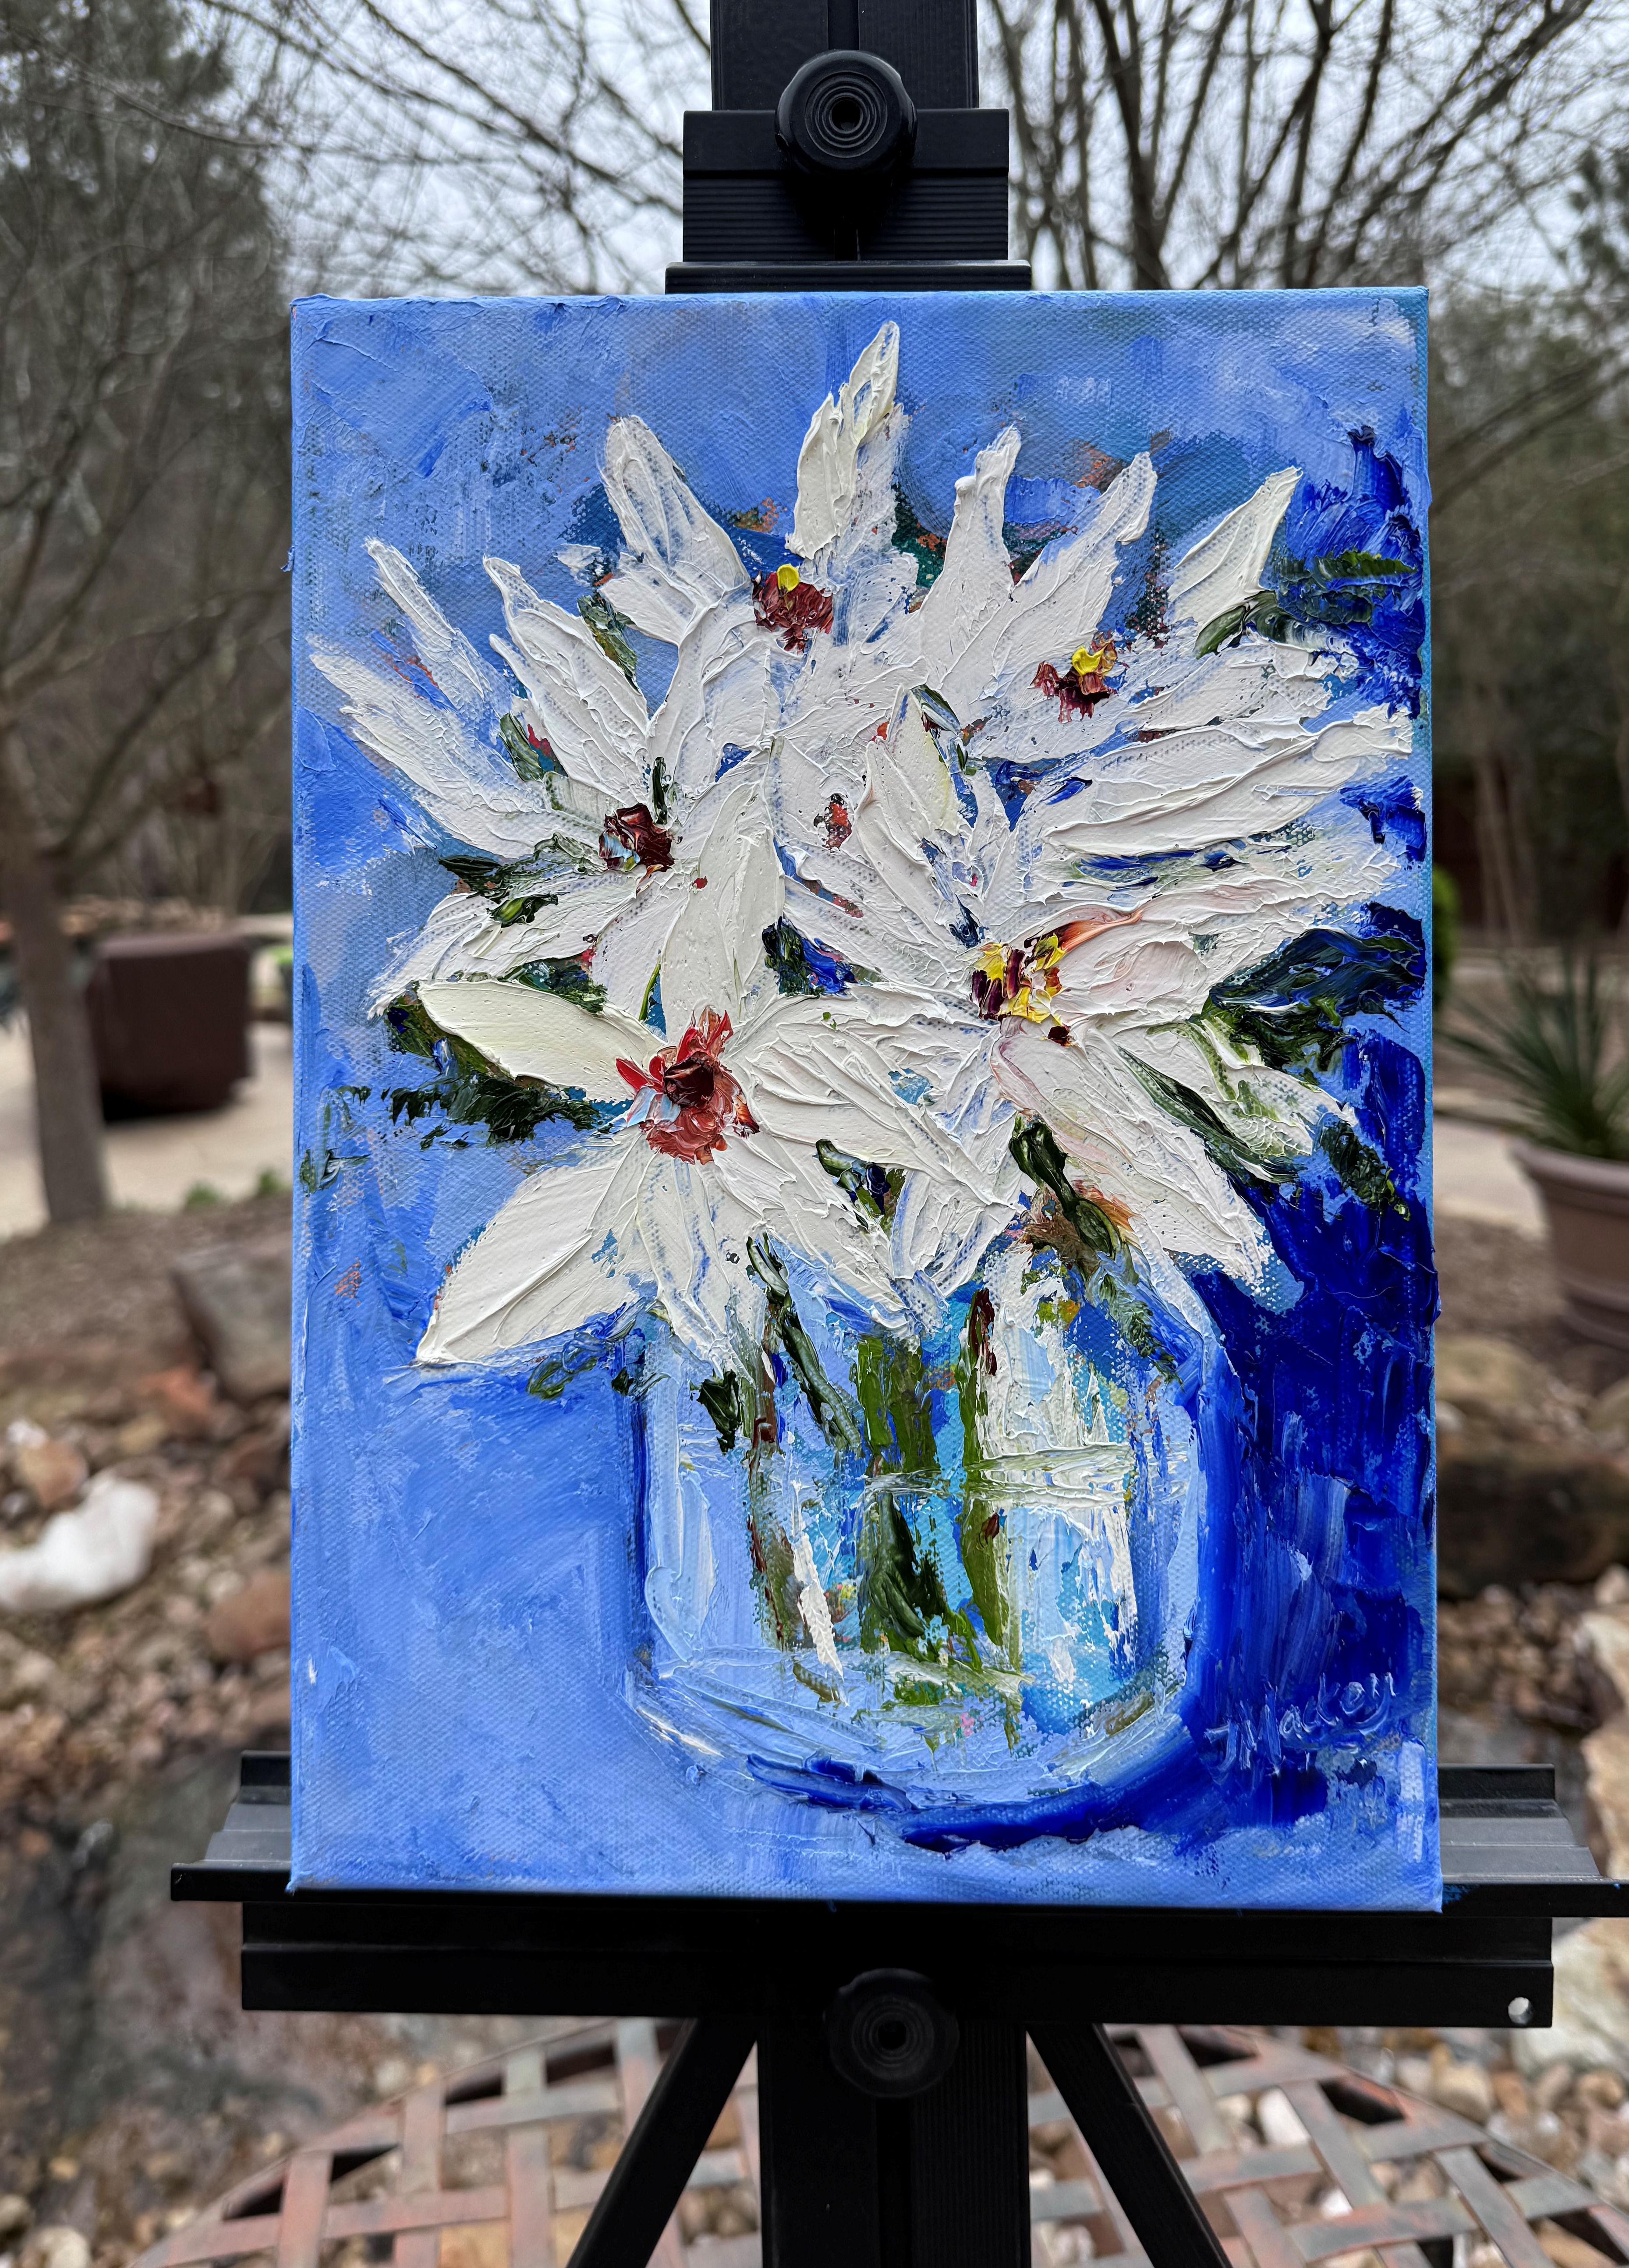 <p>Artist Comments<br>White lilies grace a clear vase. The blue background imparts a refreshing and vibrant energy to the still life. Painted with a palette knife, the spontaneous strokes impart each petal with rich textures.</p><br/><p>About the